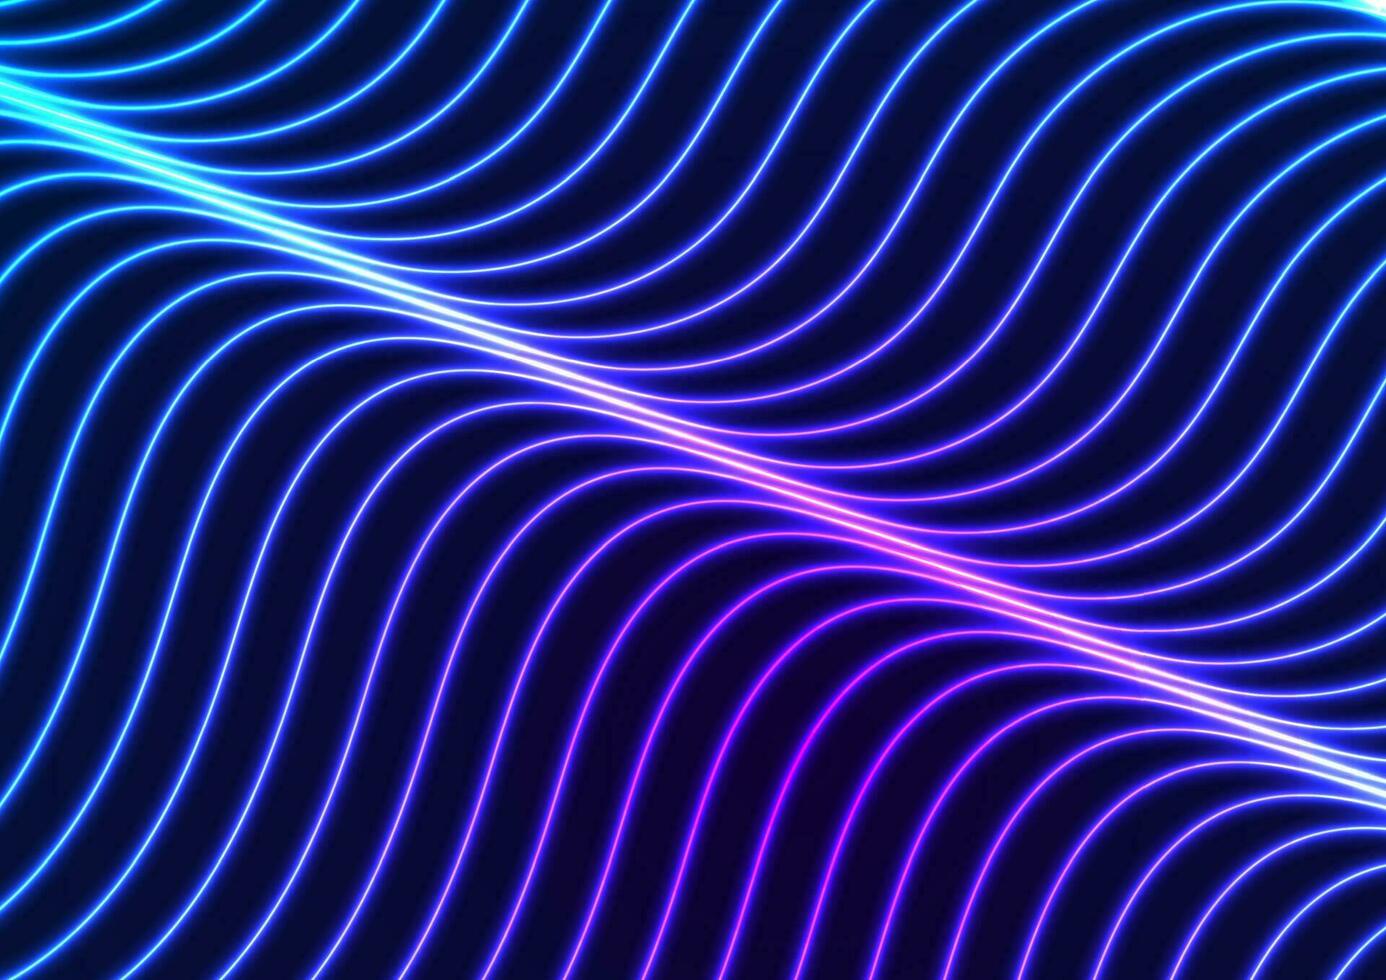 Blue ultraviolet neon curved wavy lines abstract background vector